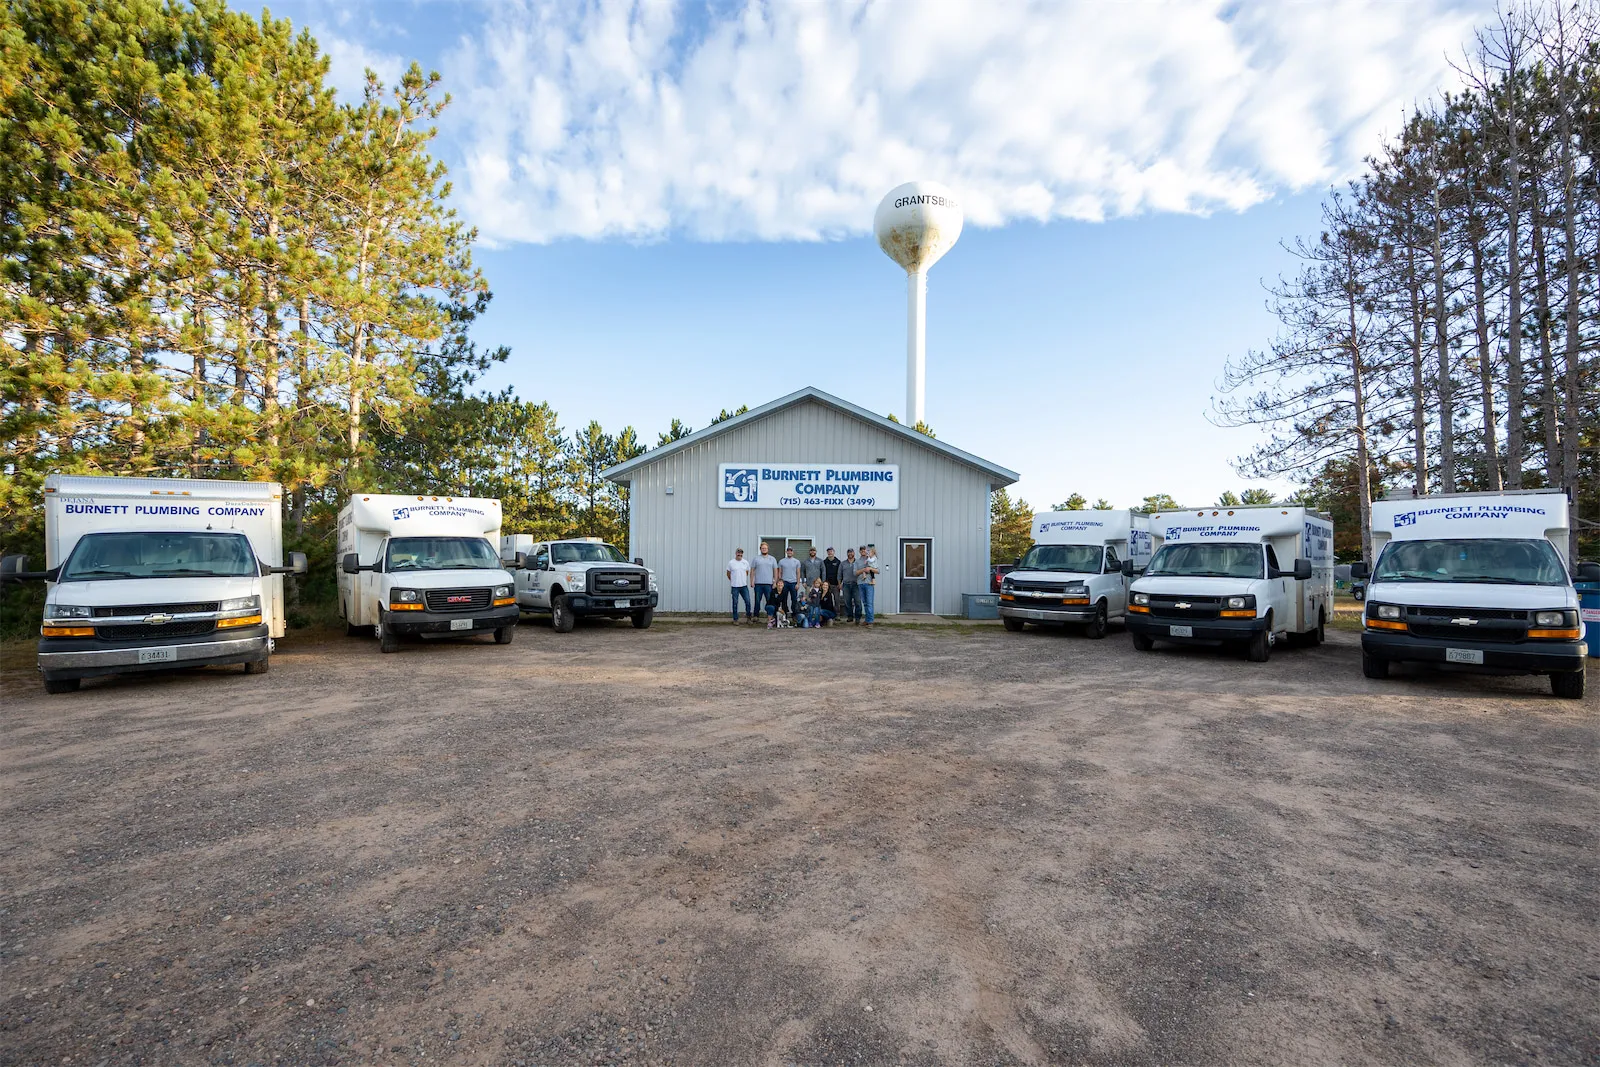 A group photo of the employees and vehicles of Burnett Plumbing Company.